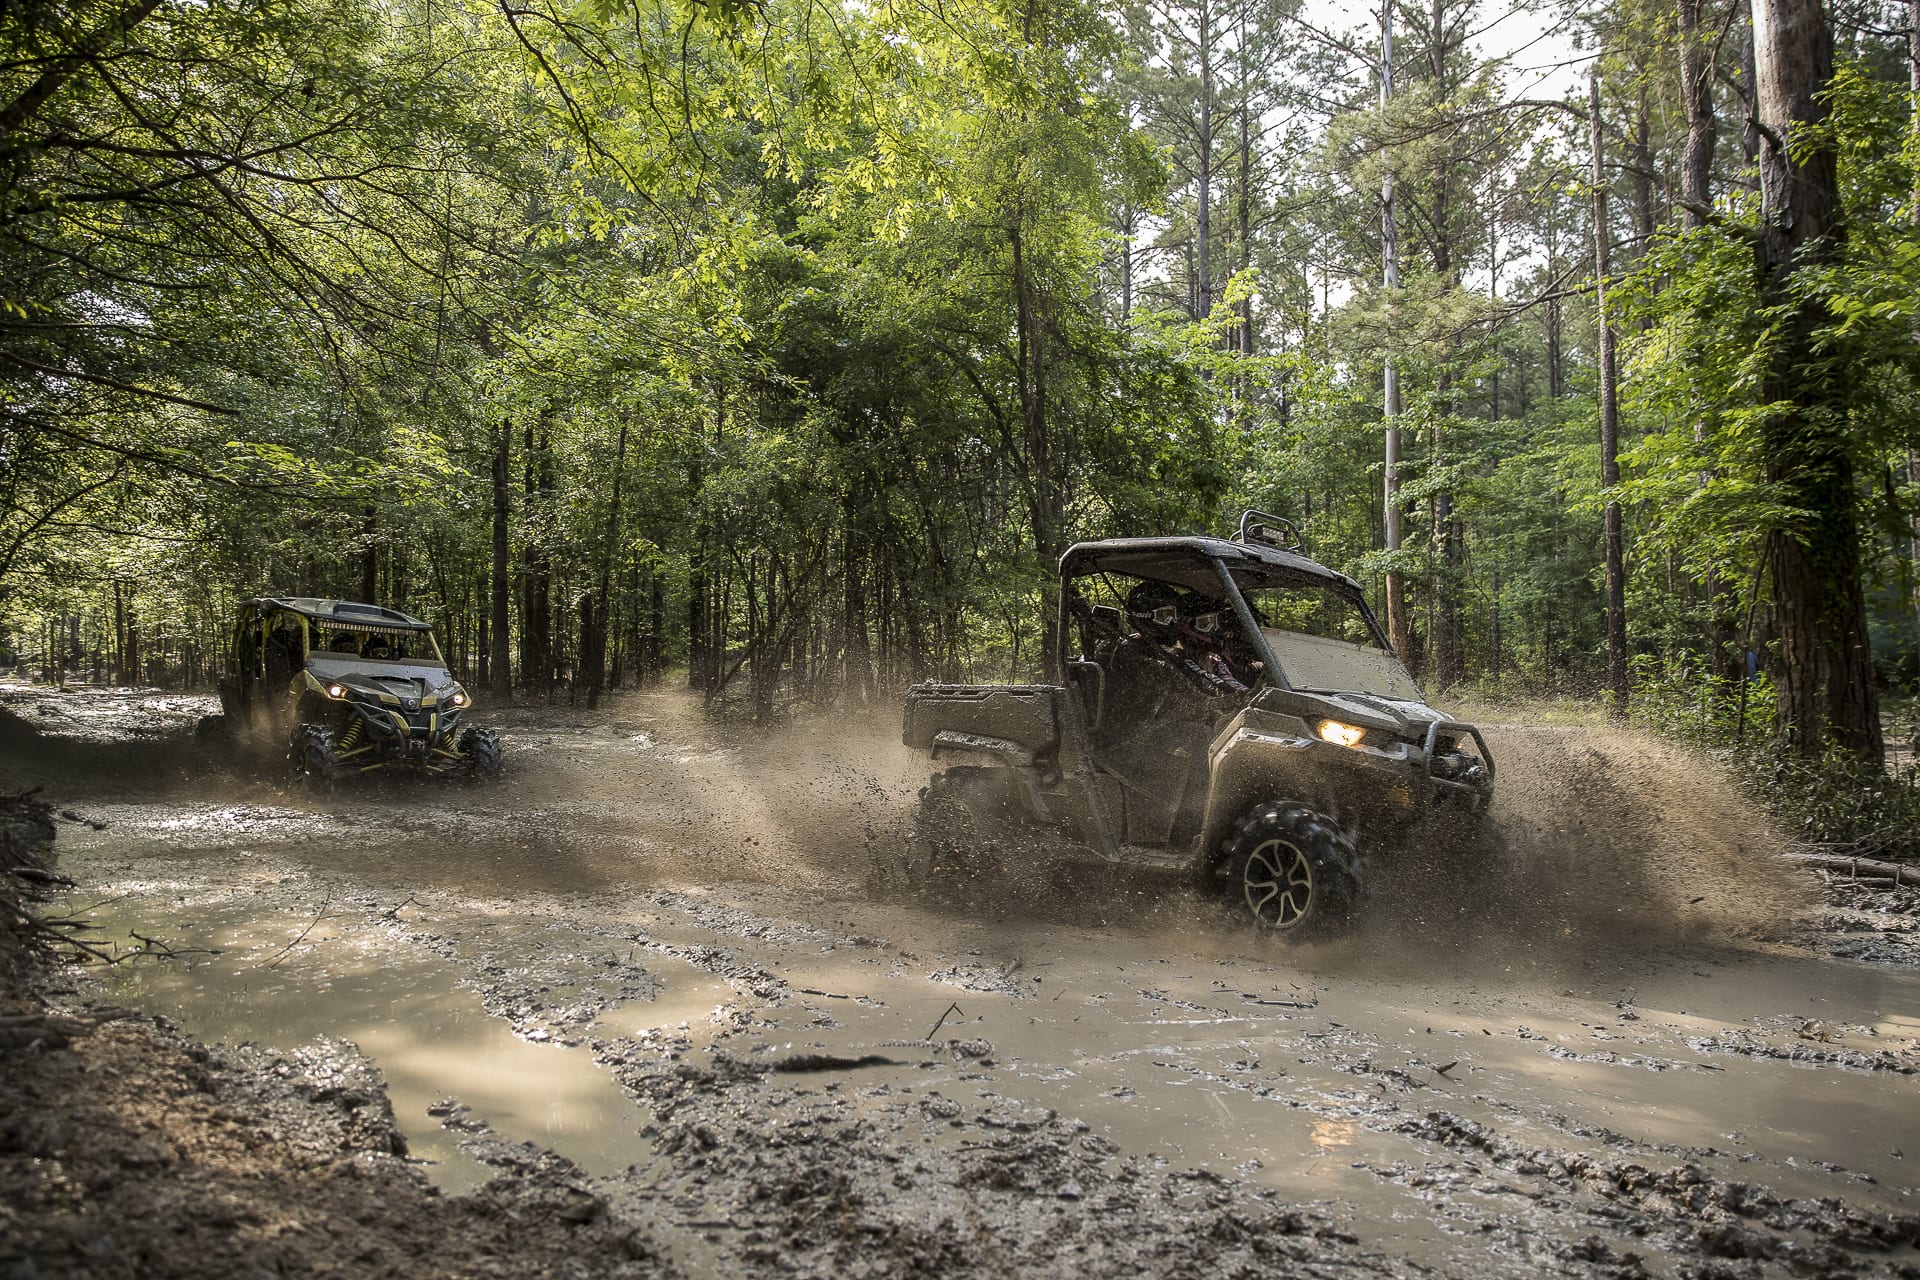 2018 Can-Am Defender X MR Lineup